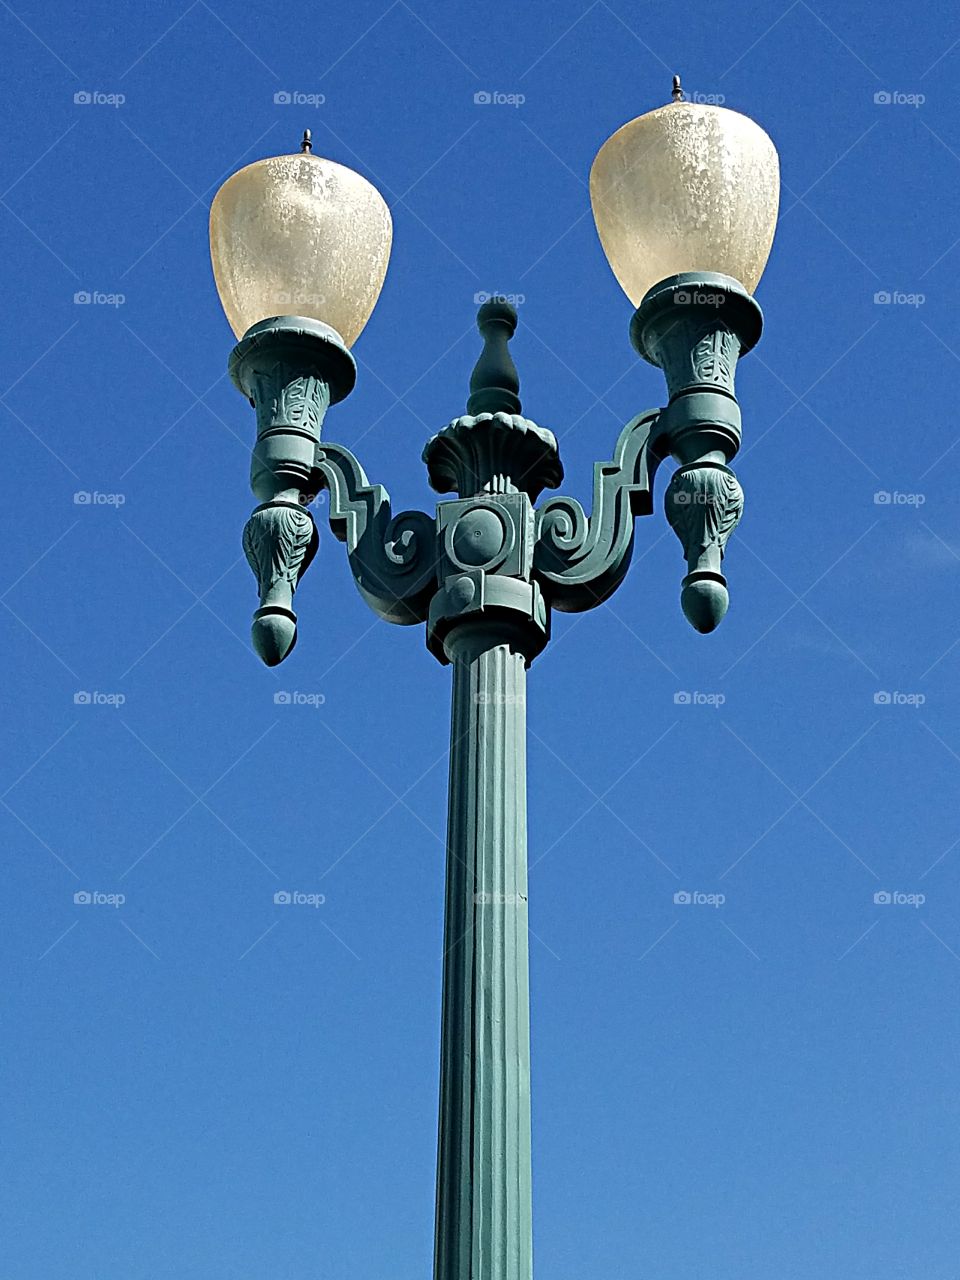 Historic old street lamps!